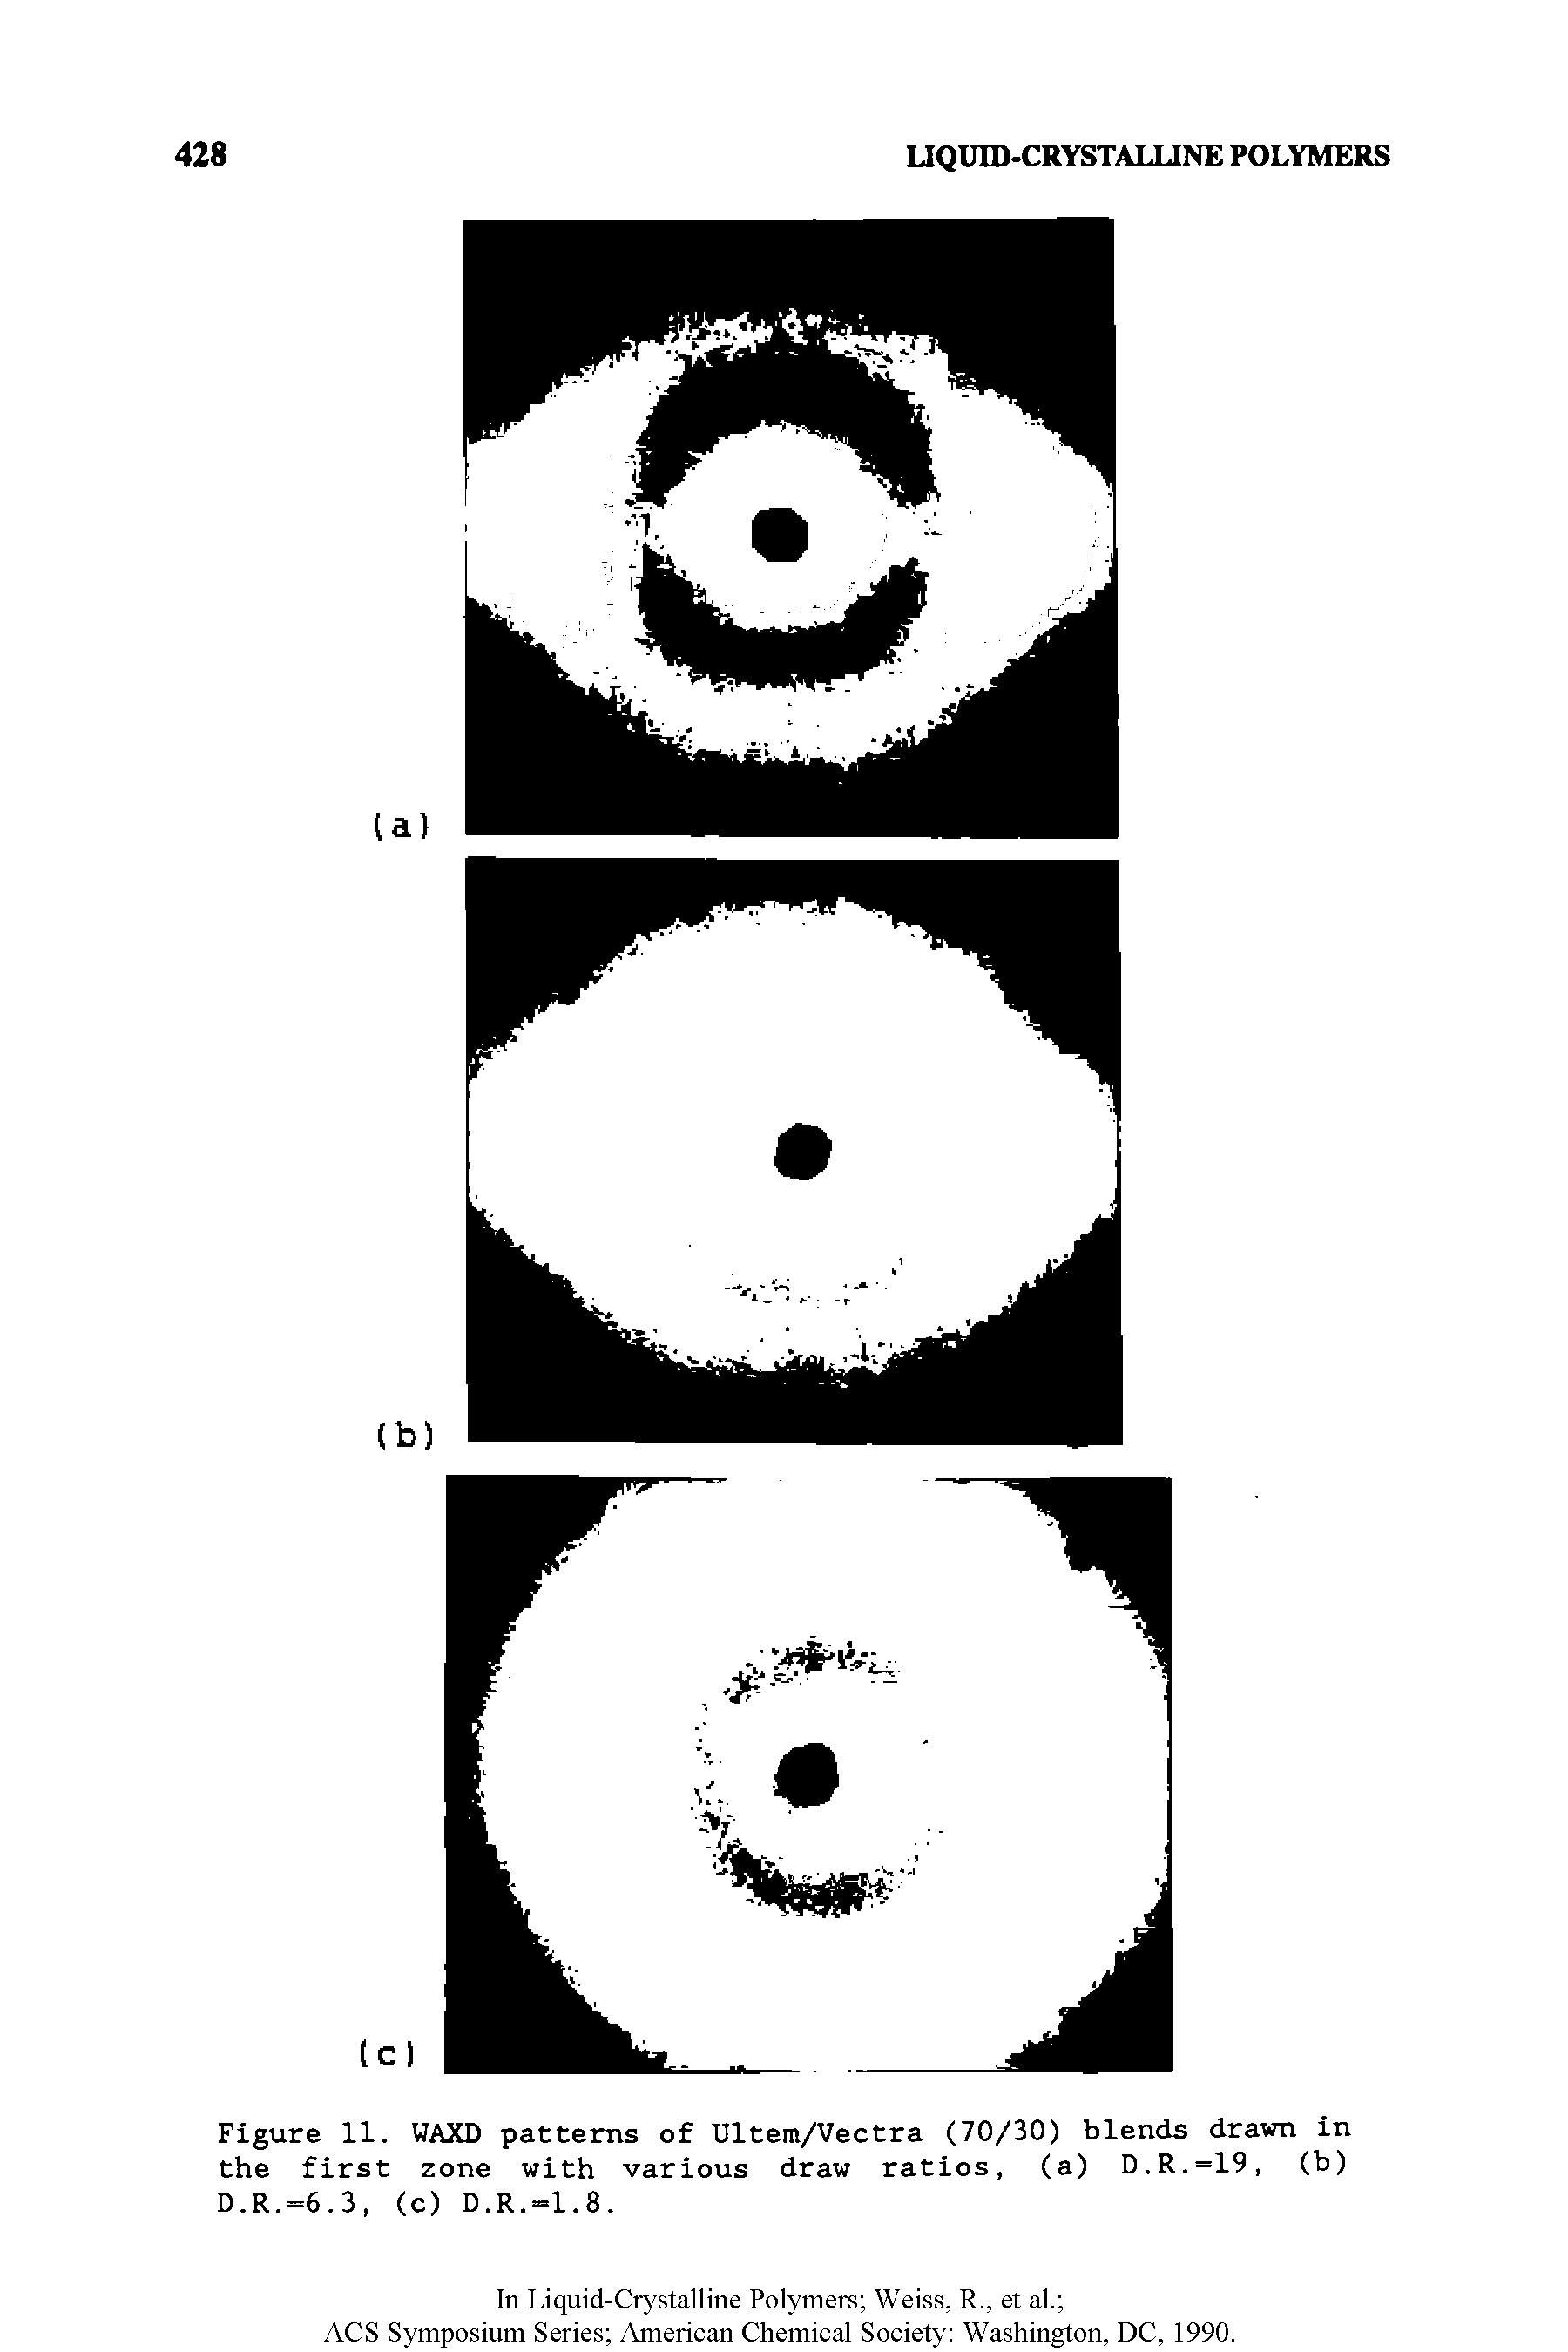 Figure 11. WAXD patterns of Ultem/Vectra (70/30) blends drawn in the first zone with various draw ratios, (a) D.R.=19, (b) D.R.-6.3, (c) D.R.-1.8.